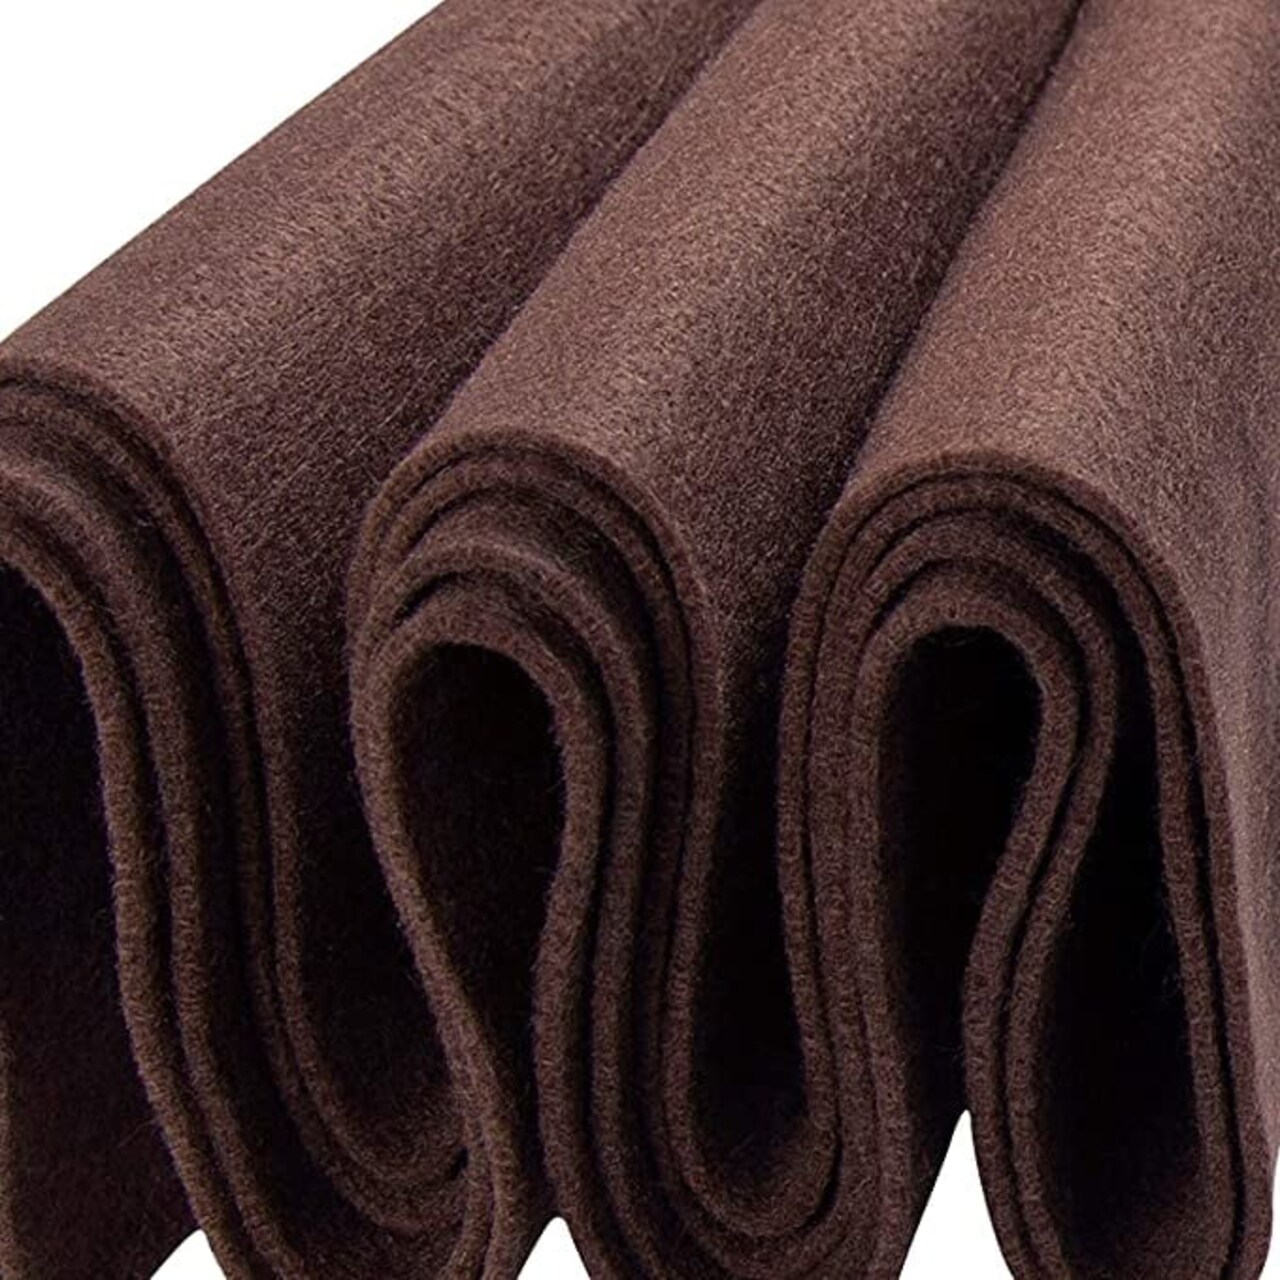 FabricLA Acrylic Felt Fabric - 72 Inch Wide 1.6mm Thick Felt by The Yard -  Use Soft Felt Sheets for Sewing, Cushion, and Padding, DIY Arts & Crafts  (10 Yards, Light Brown)